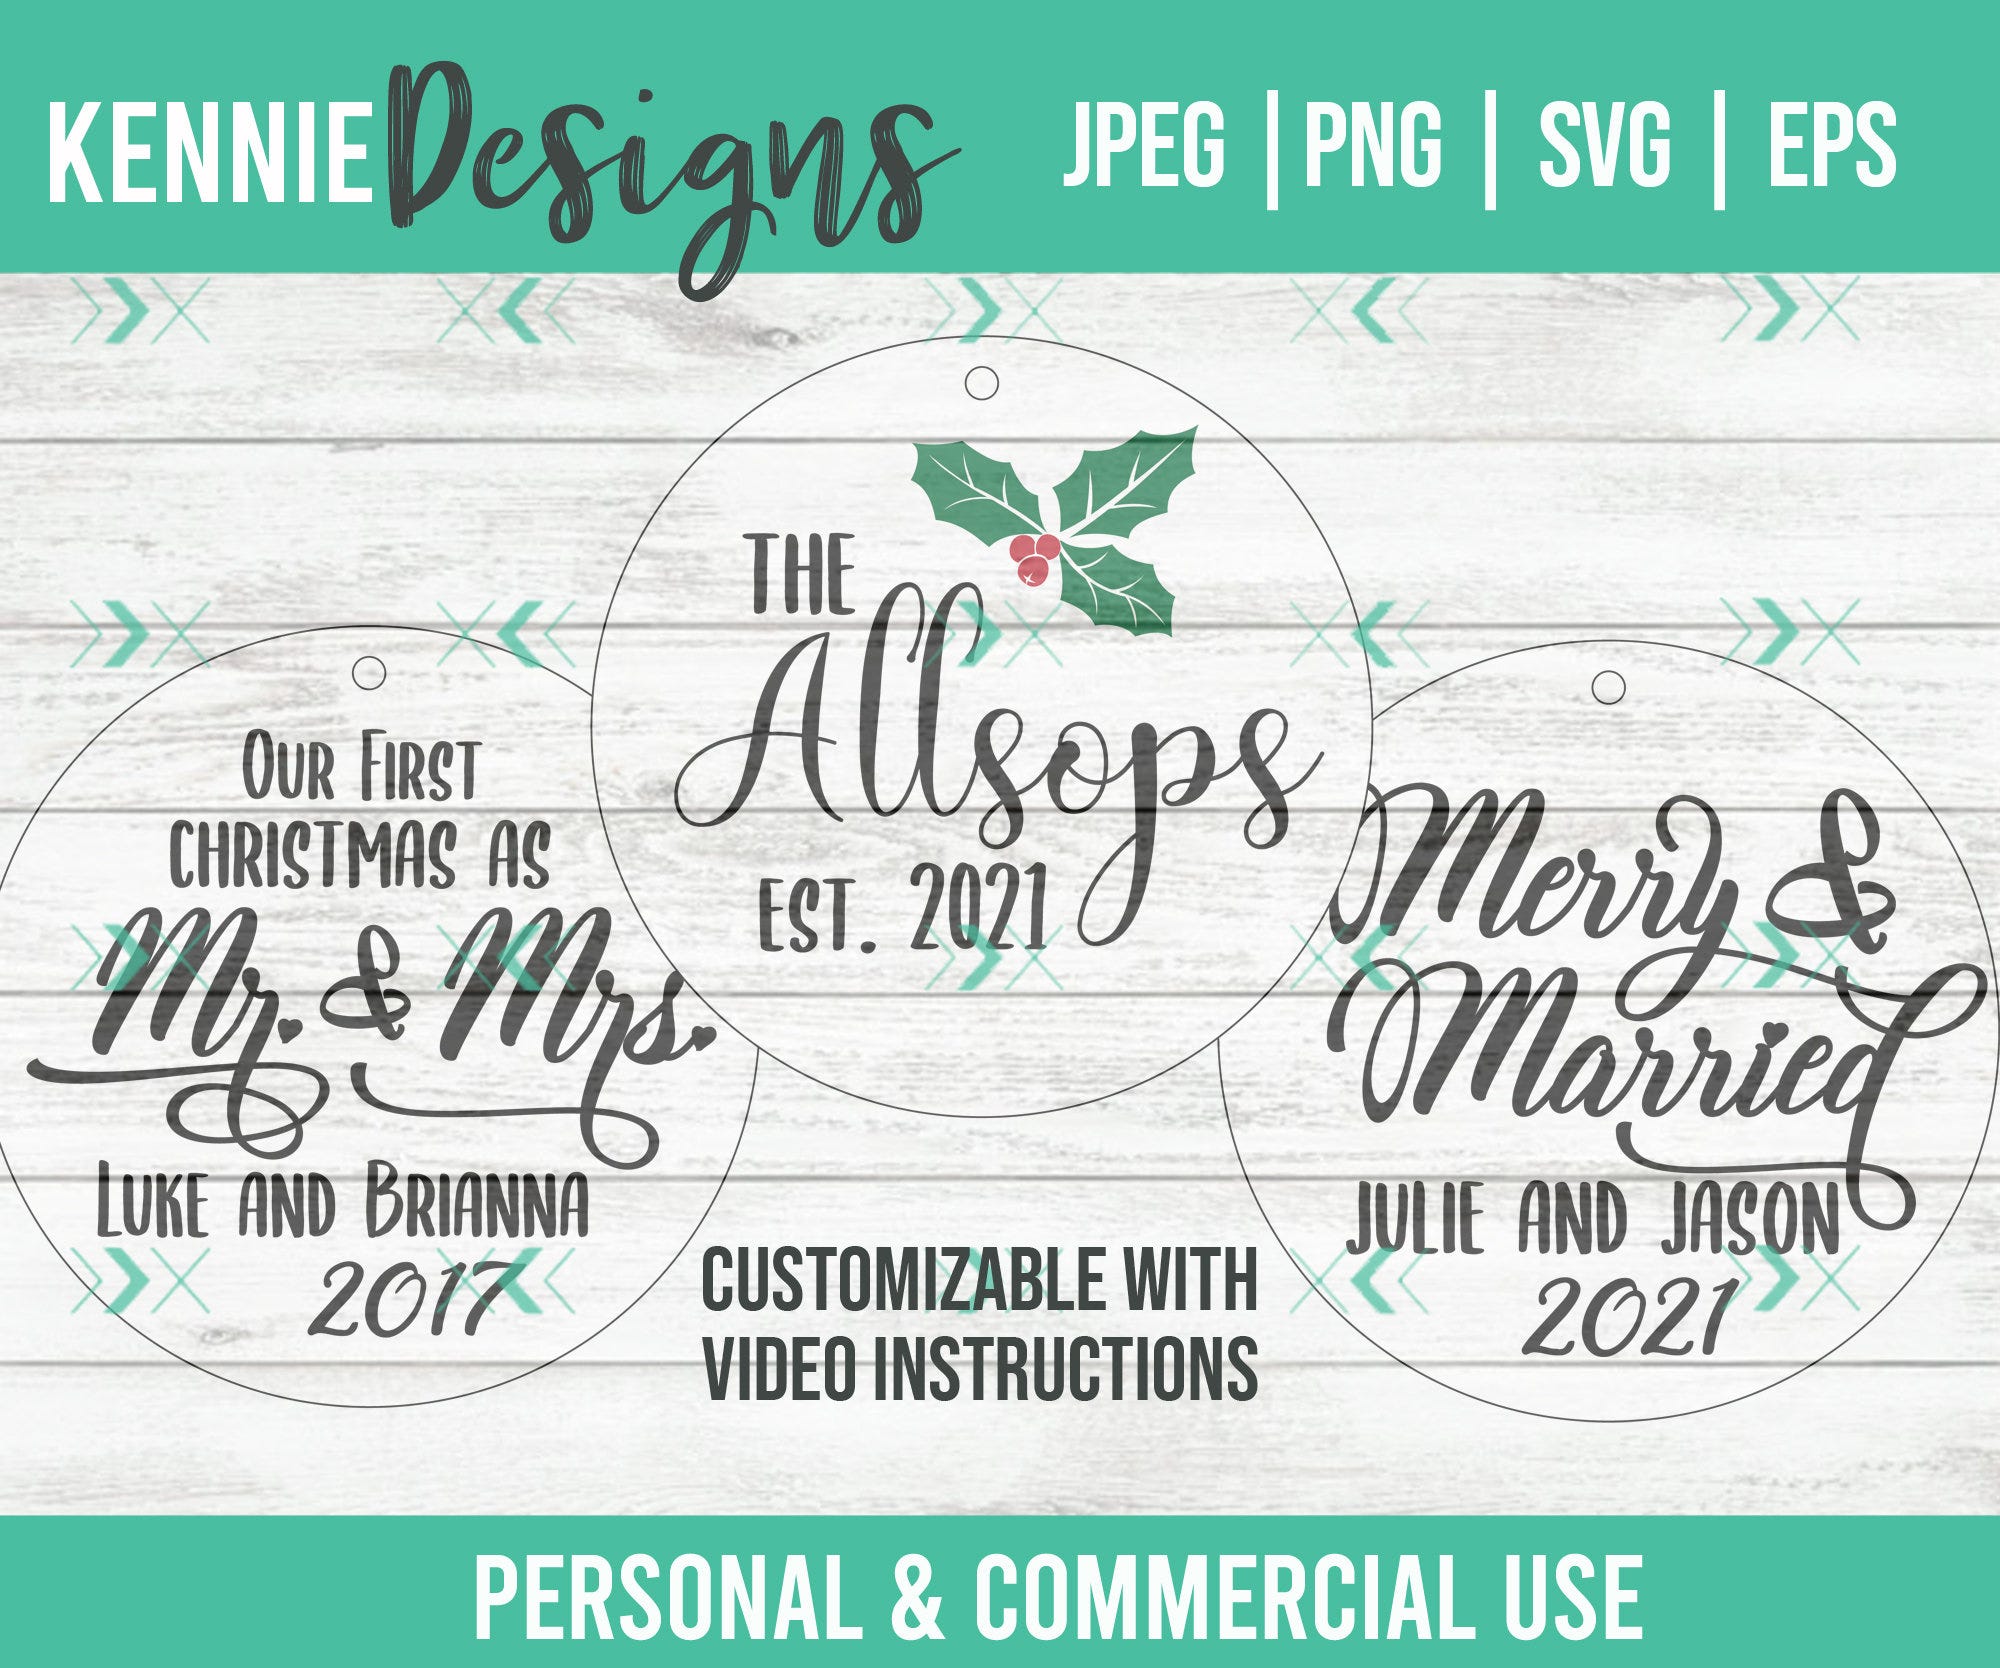 Customizable Newlywed first Christmas together Ornament SVG cut file to make keepsake for wedding year First as Mr and Mrs Merry and Married